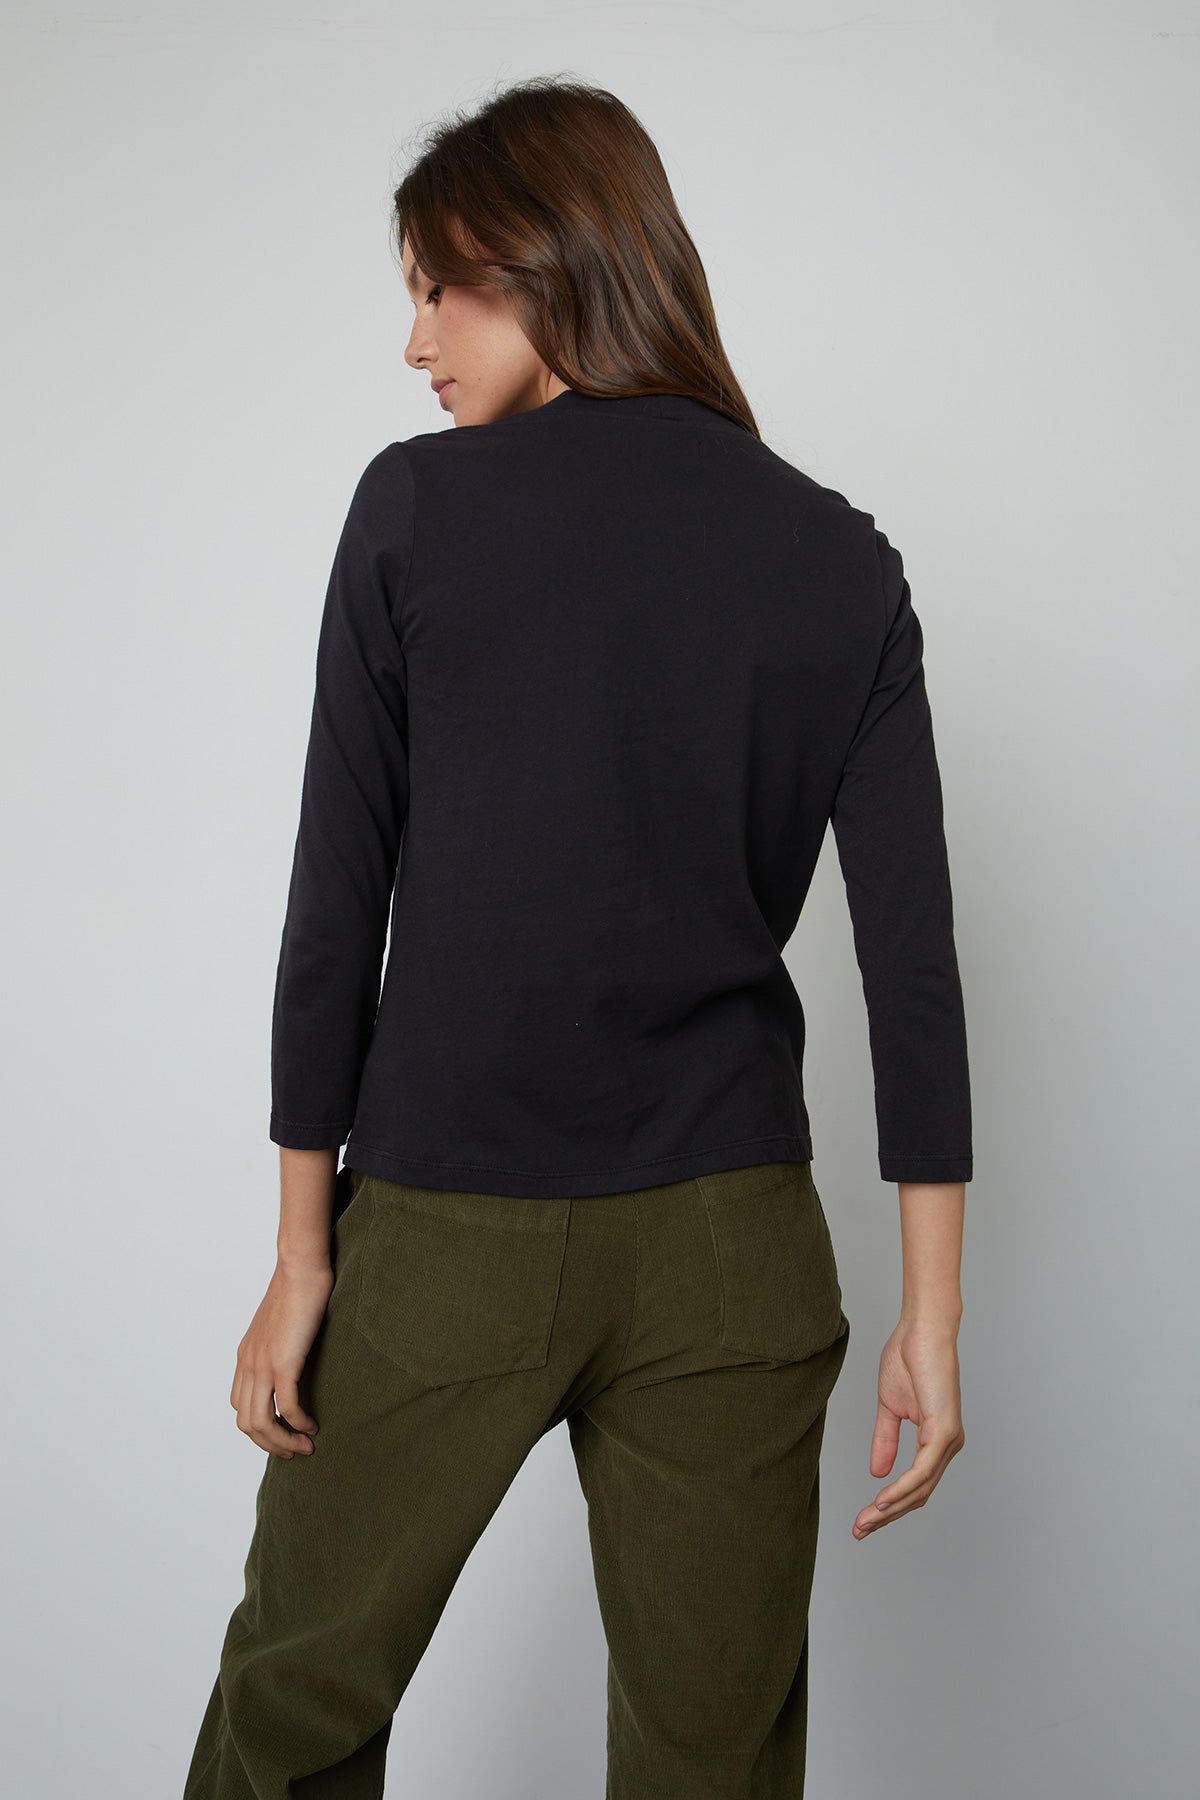   Quinny 3/4 Sleeve Mock Neck Tee in black with Vera Pant in Aloe  back view 